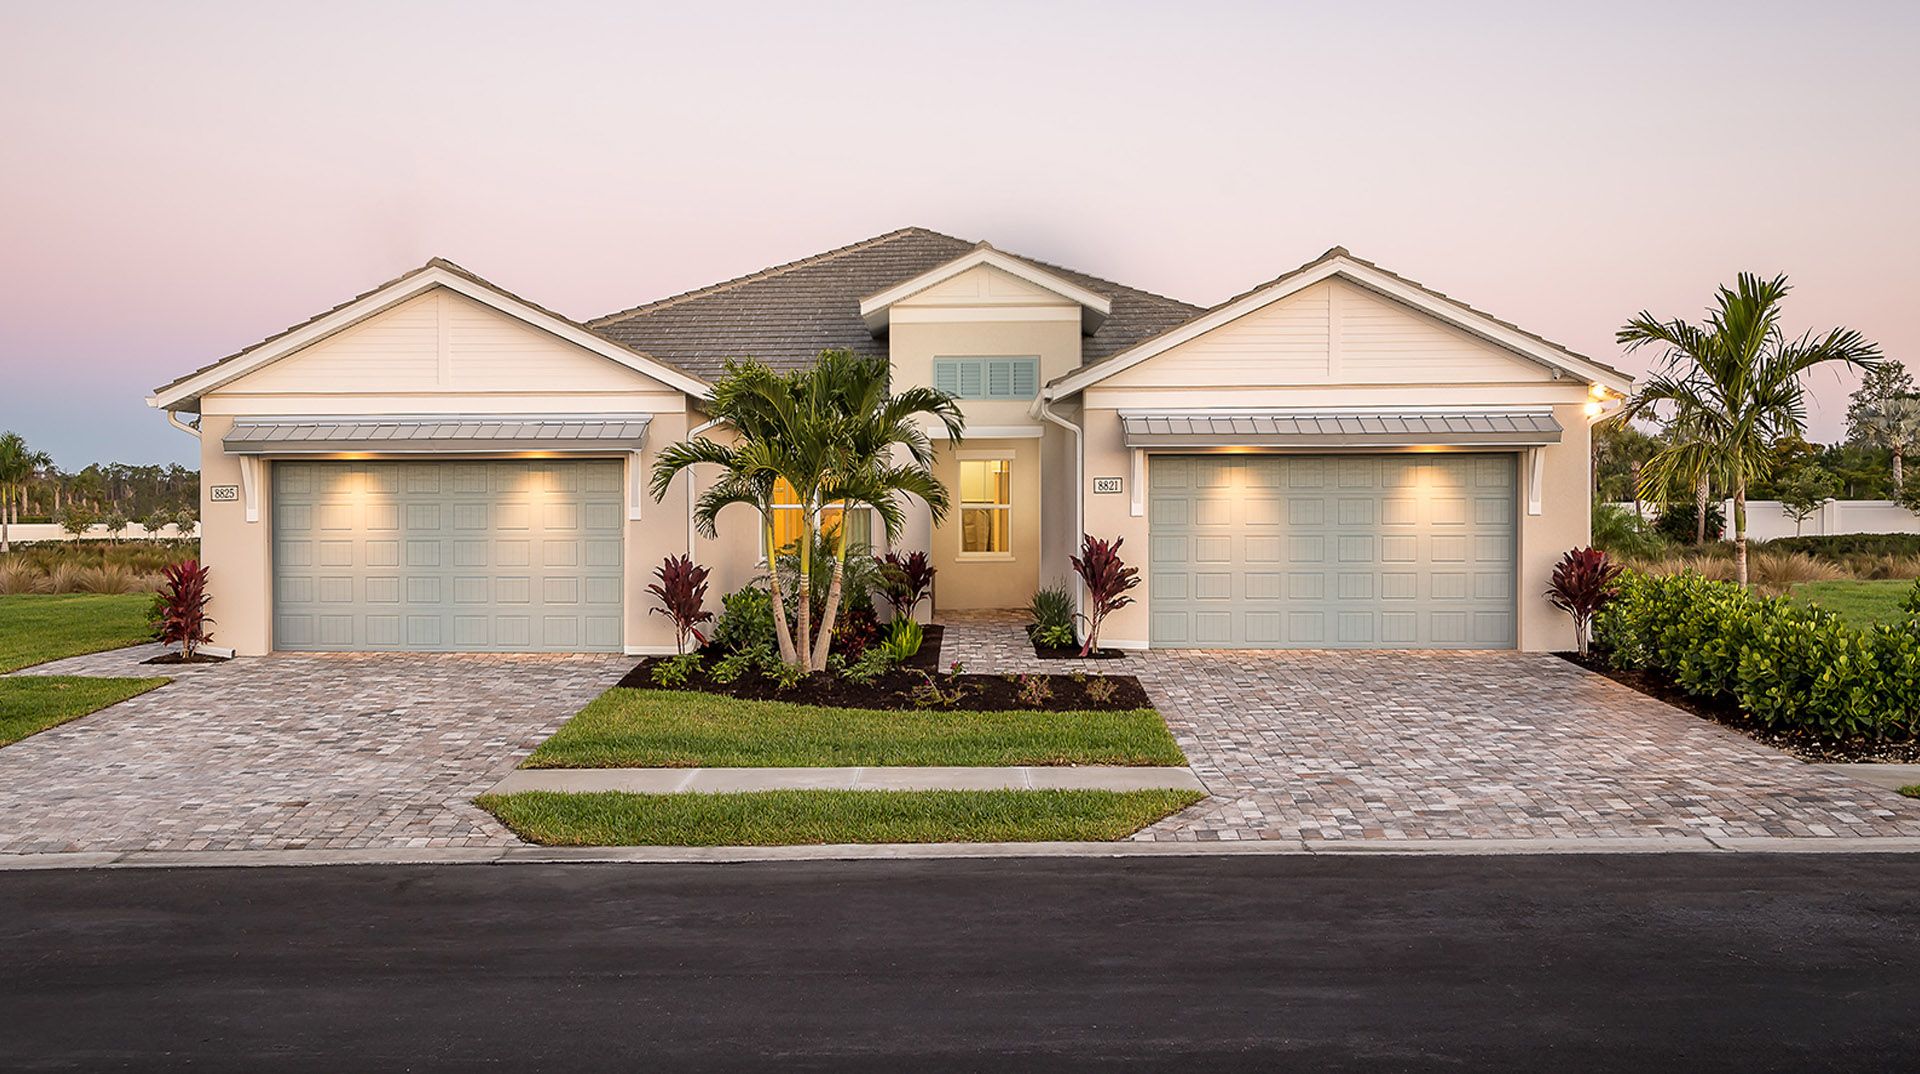 fort pierce mortgage, mortgage rates fort pierce, fort pierce mortgage broker, fort pierce mortgage lender, fort pierce mortgage calculator, fort pierce condo financing, fort pierce condotel financing, fort pierce condo mortgage, fort pierce condotel mortgage,